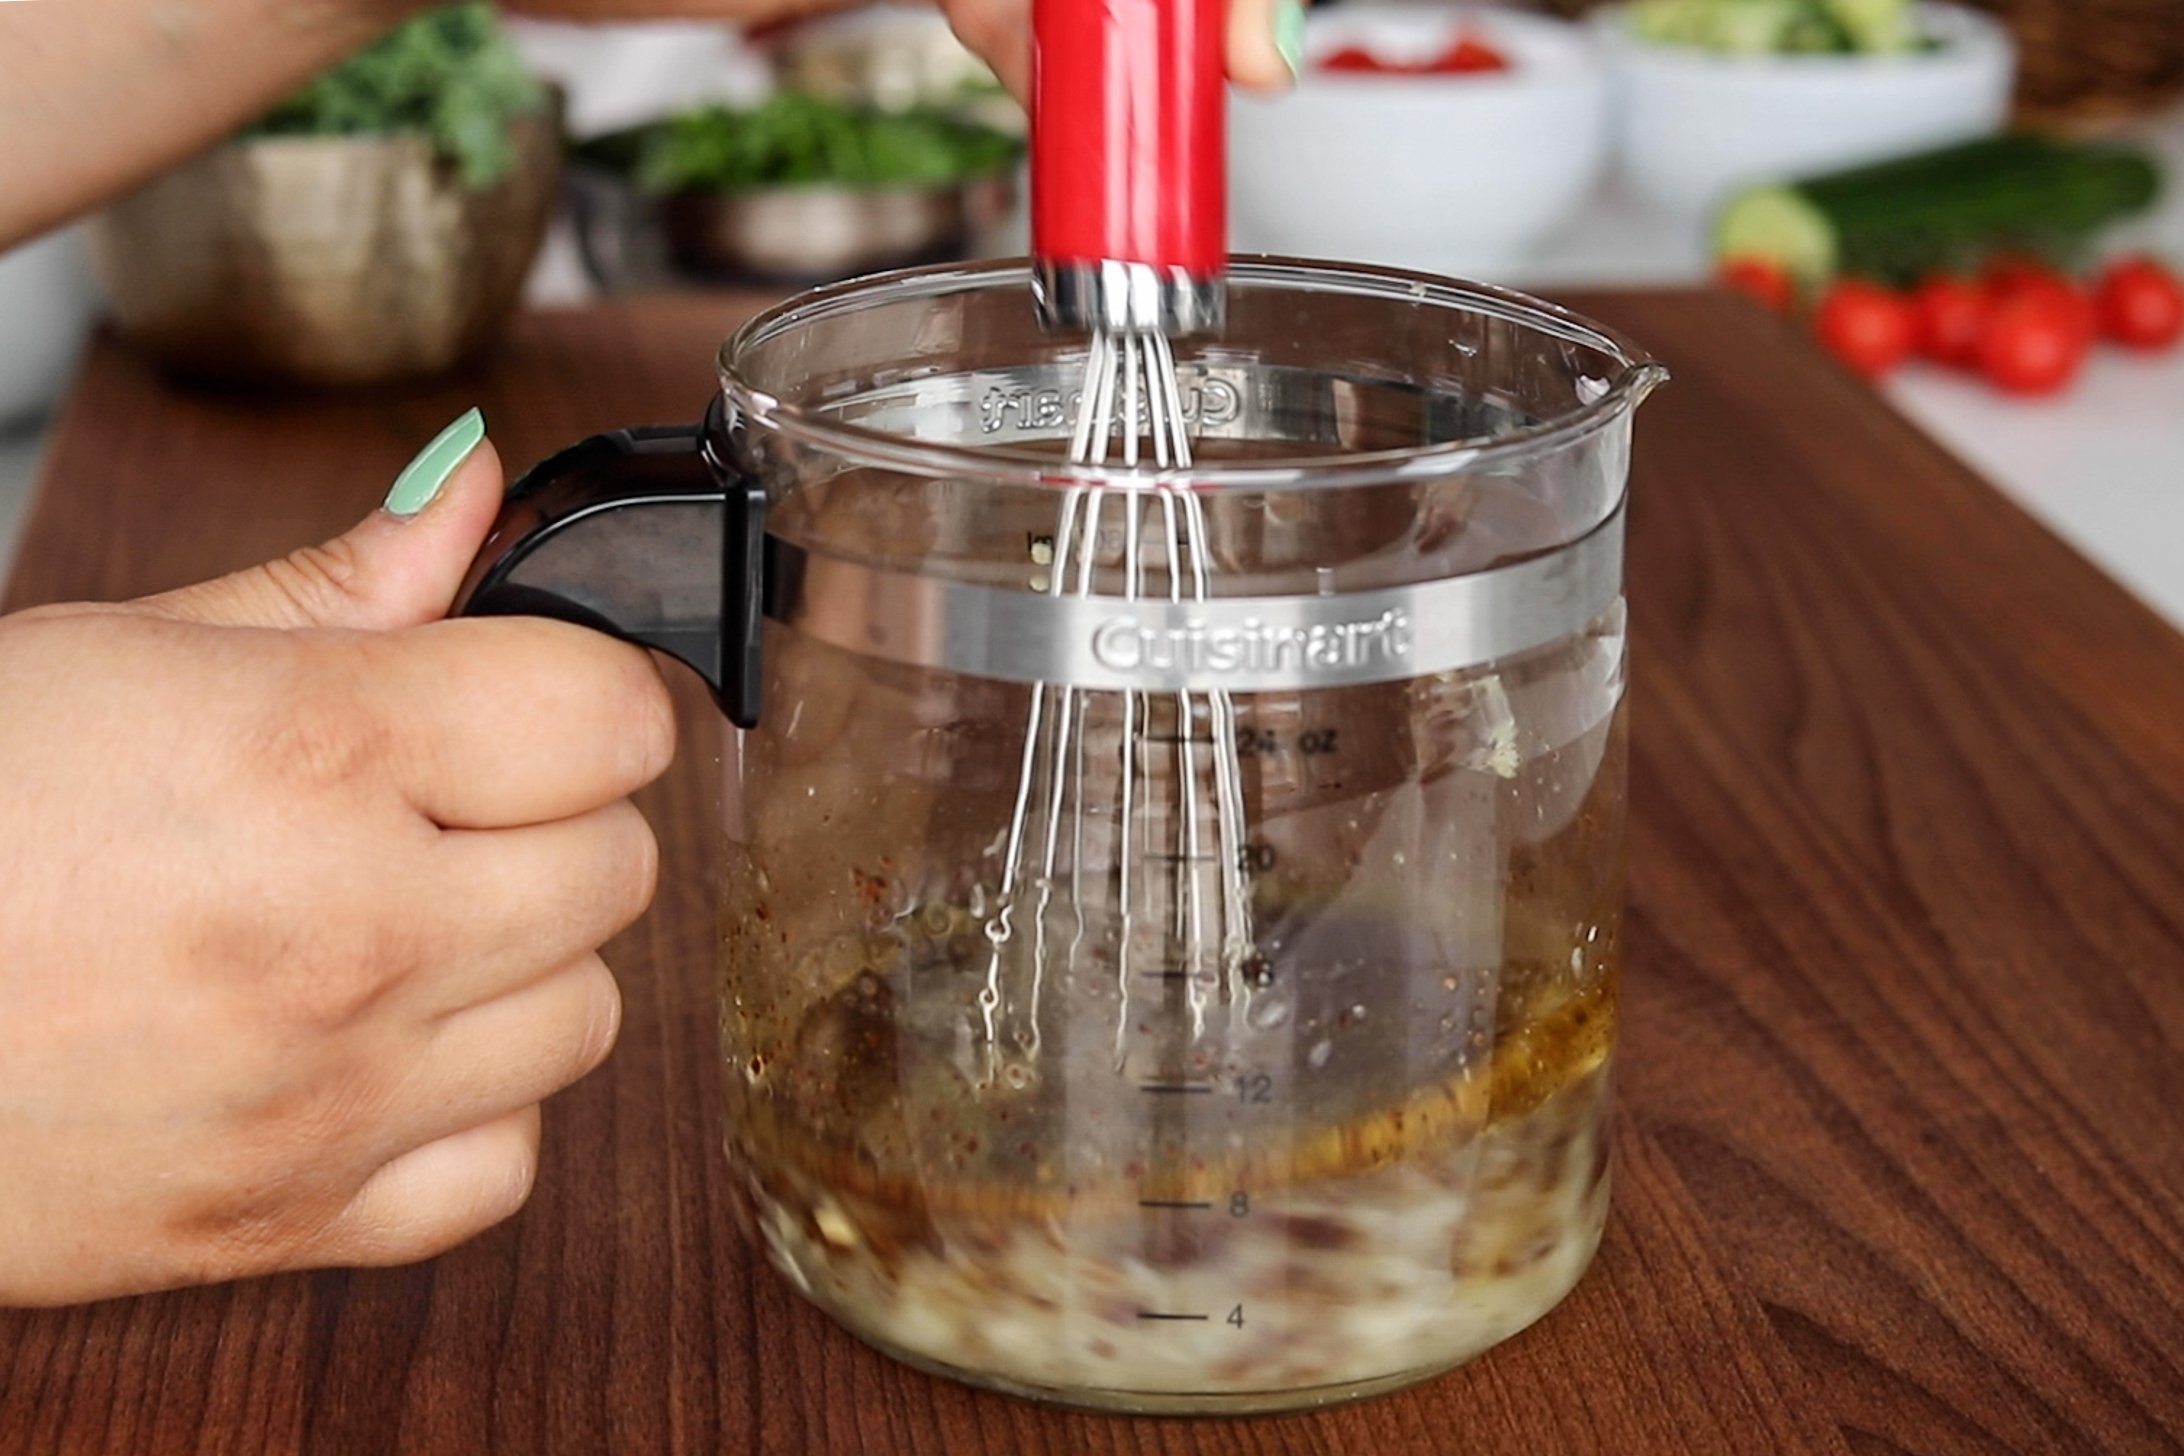 A hand holding a whisk and a jar mixing salad dressing ingredients.